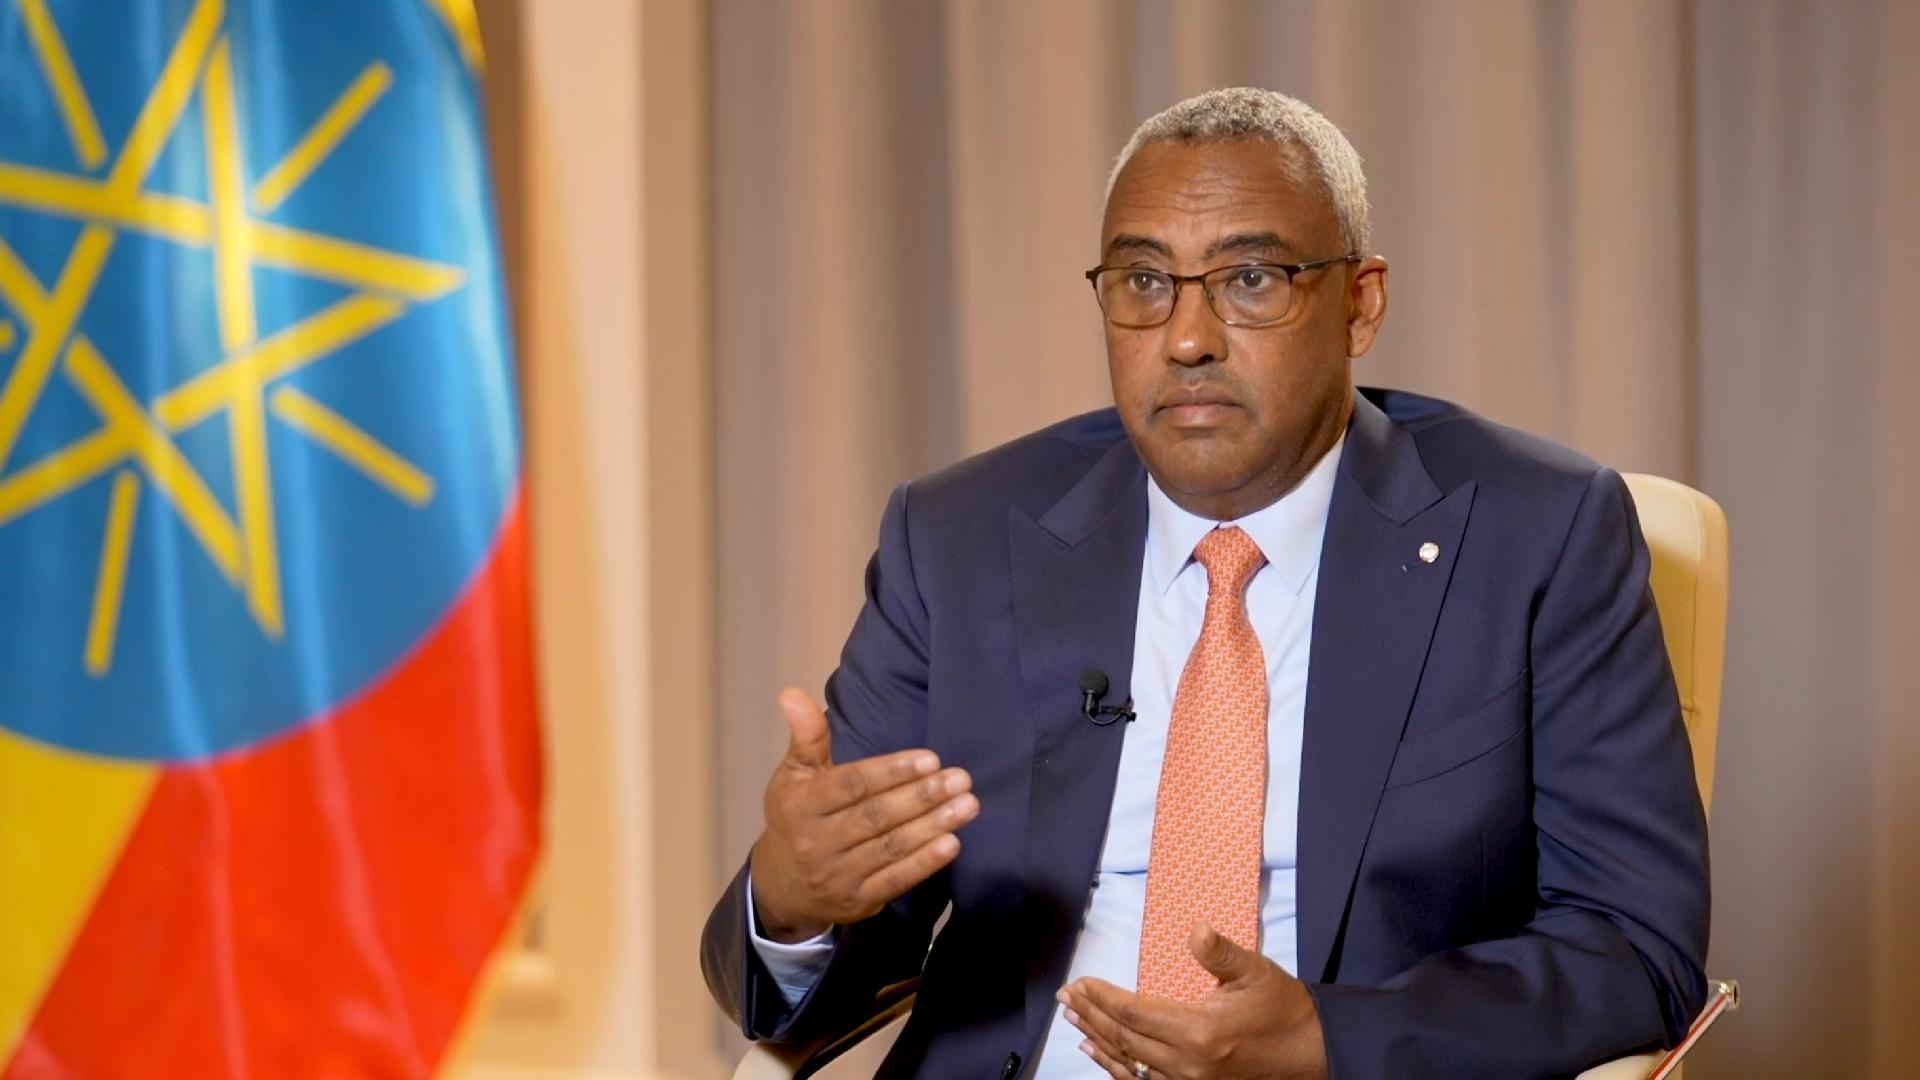 Demeke: China-Ethiopia relations getting more consolidated